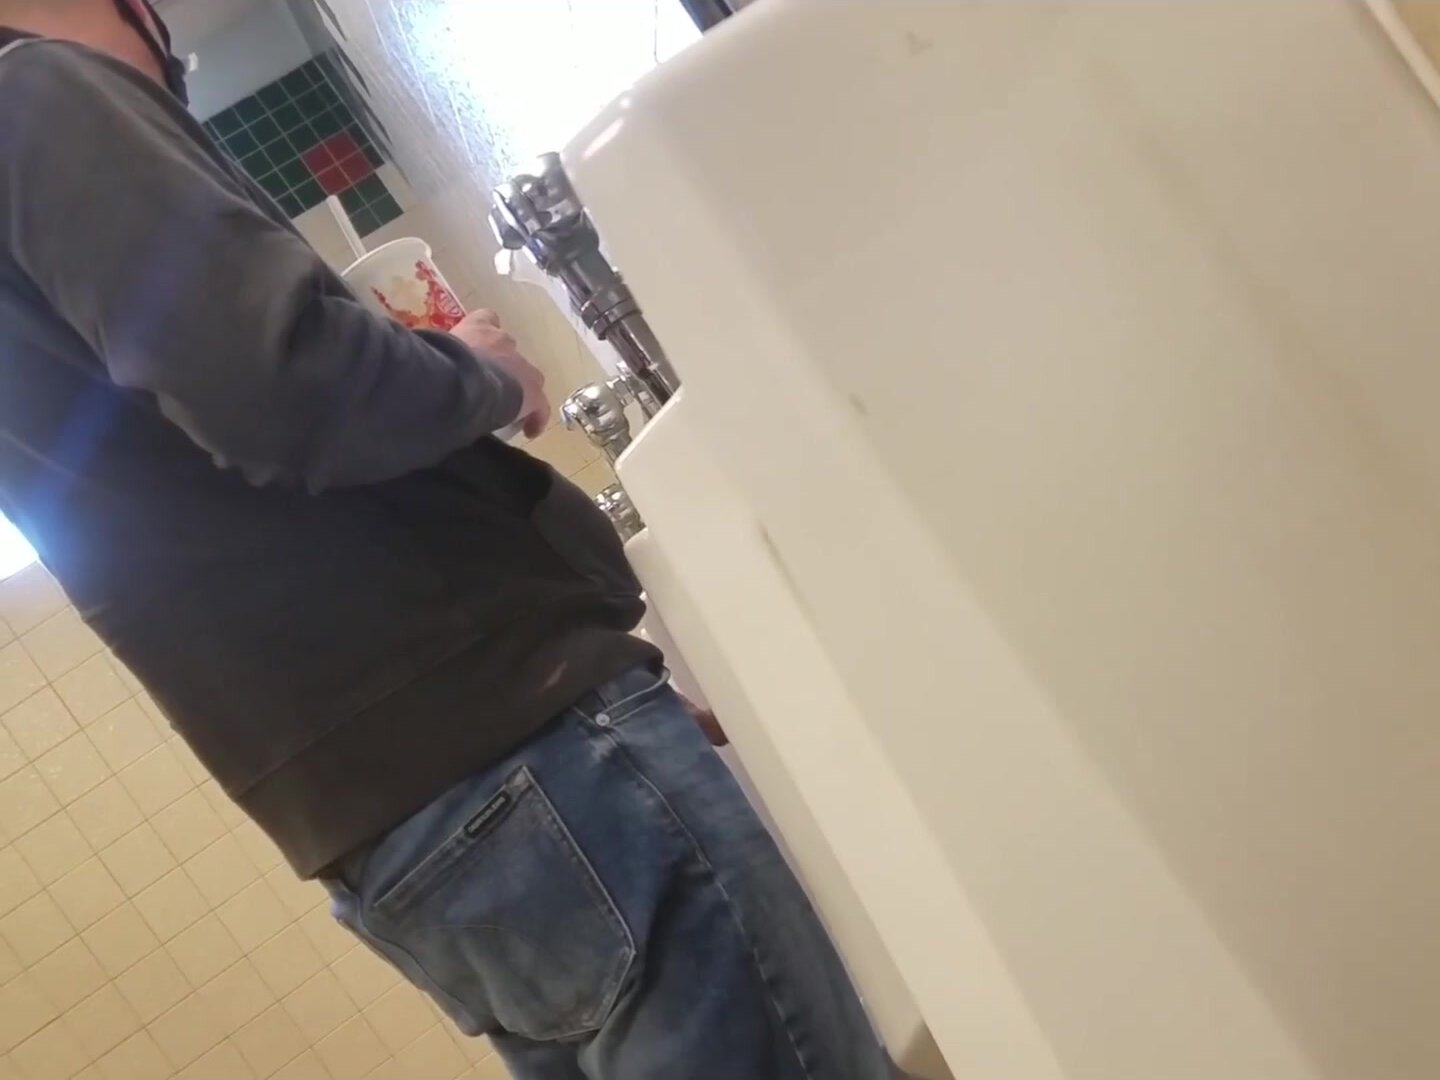 Spying on dude at urinal